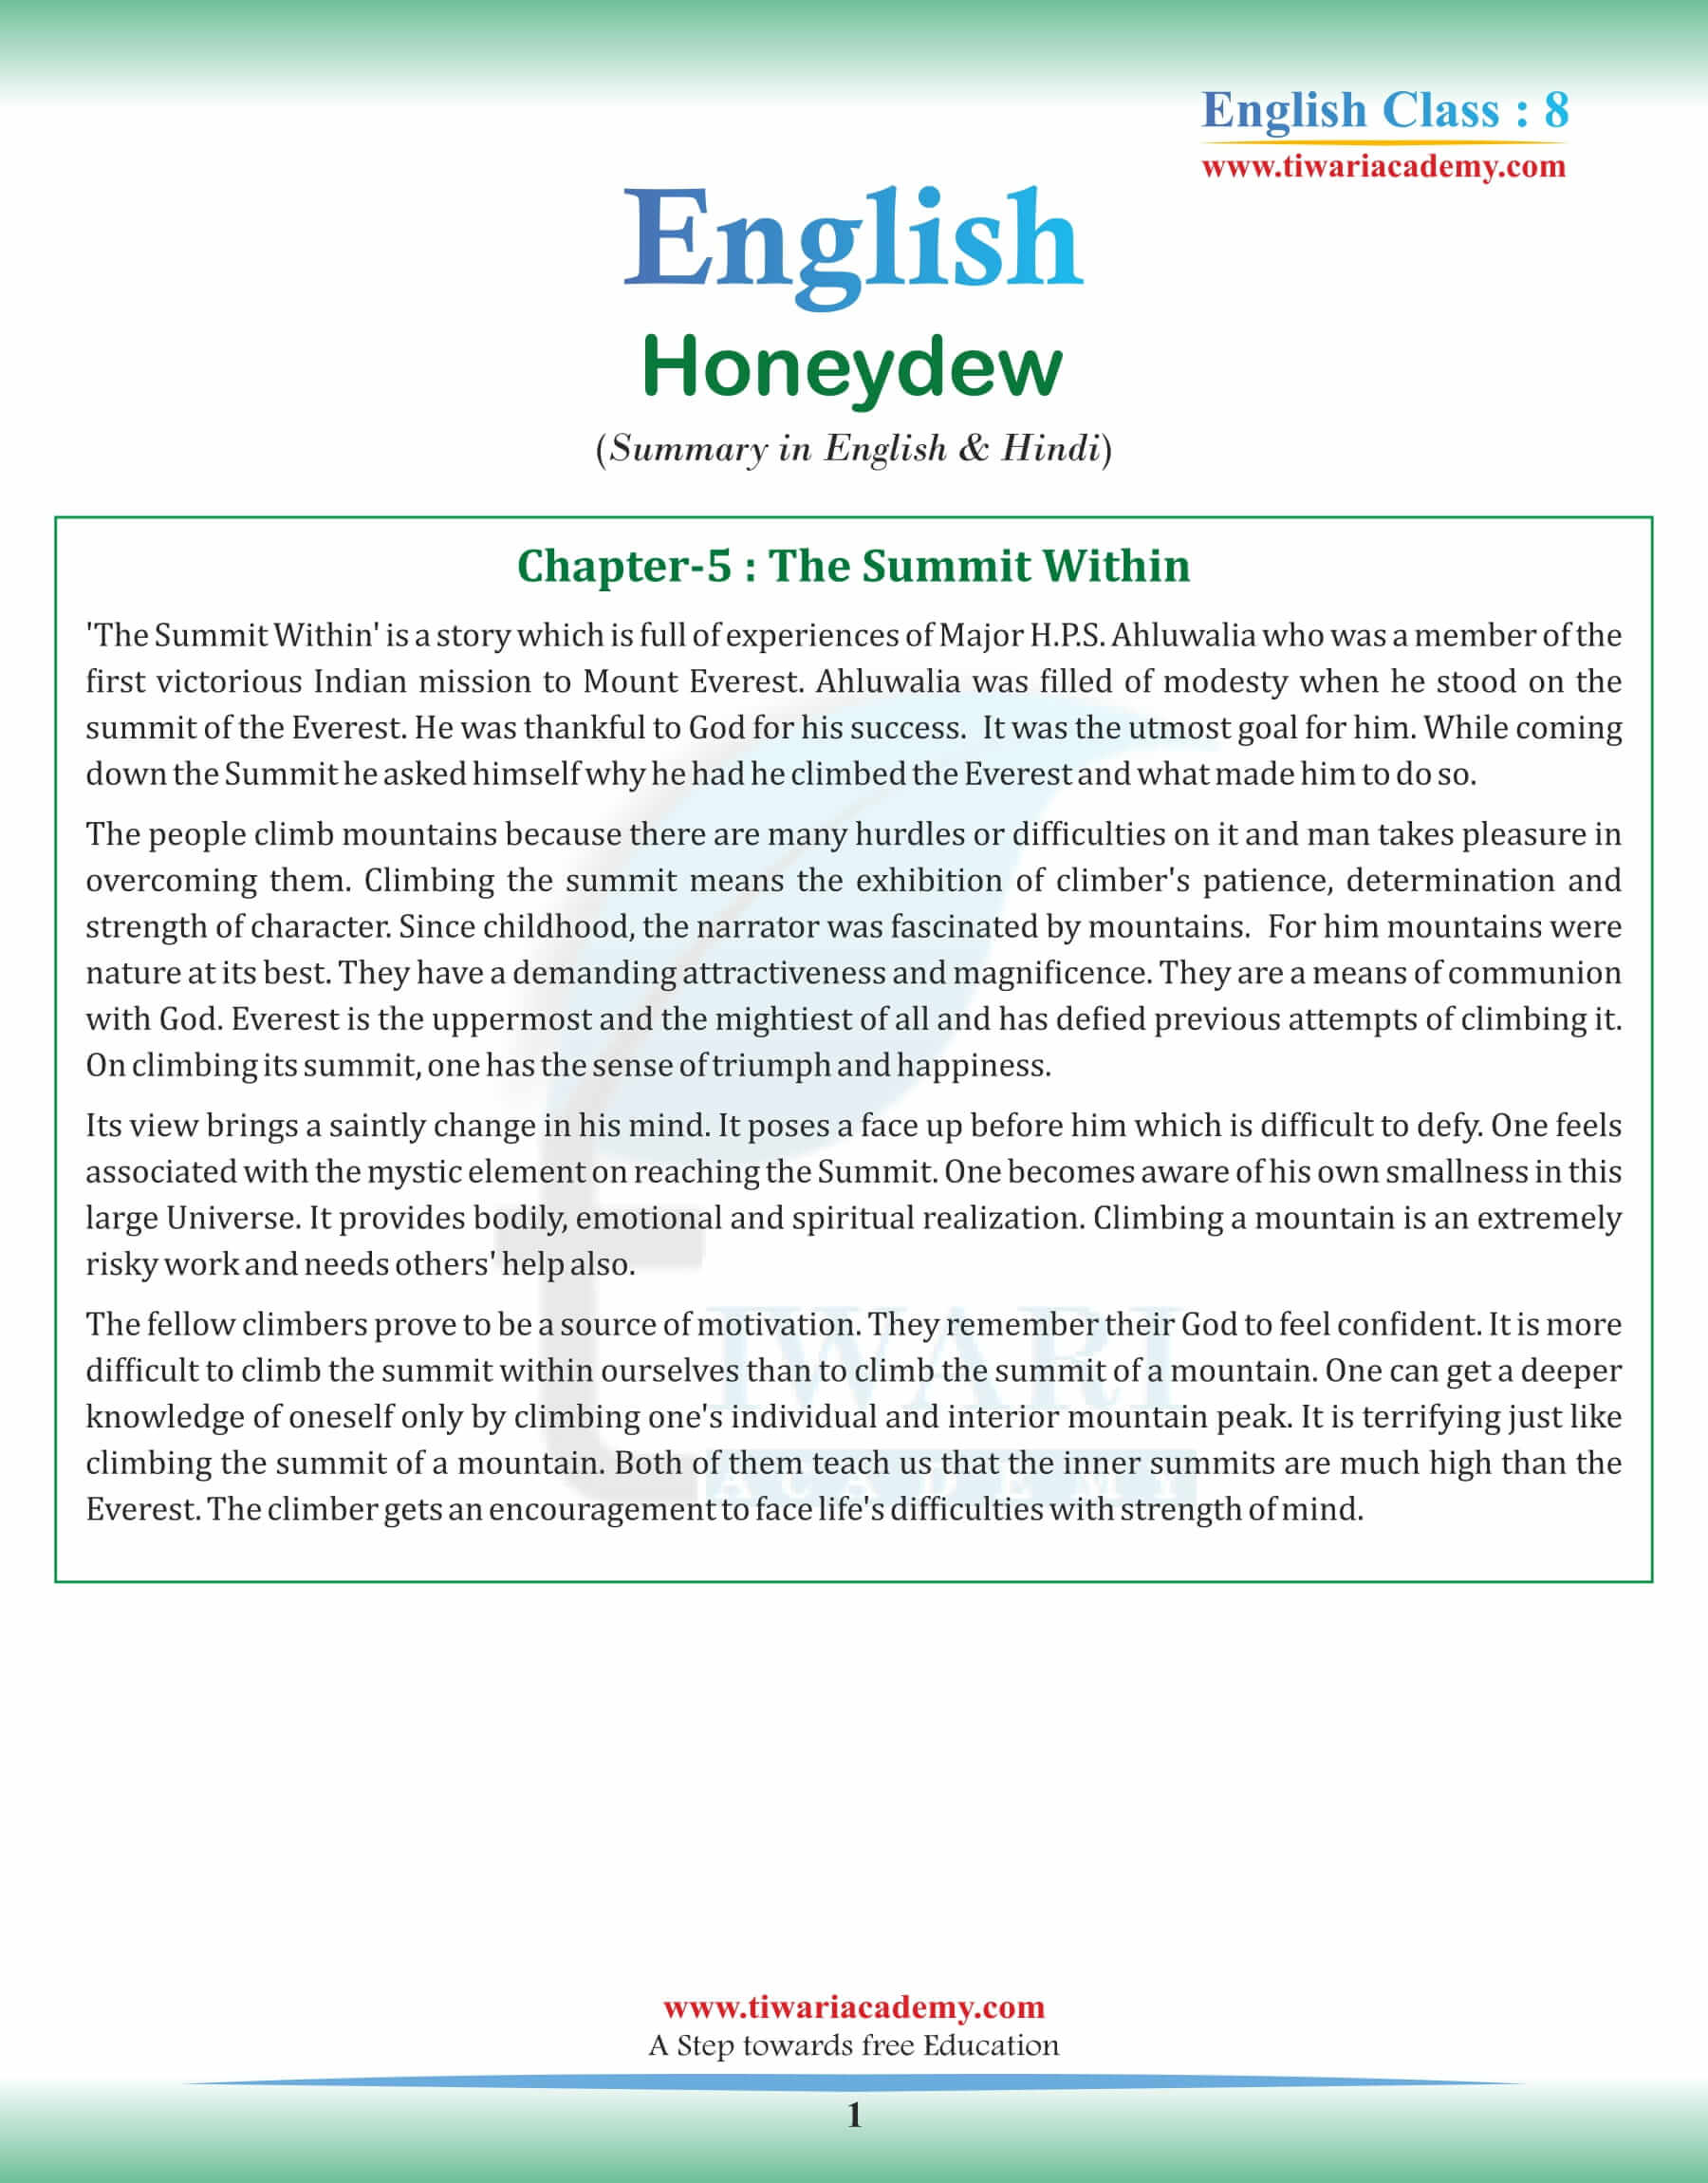 Class 8 English Chapter 5 Summary in English